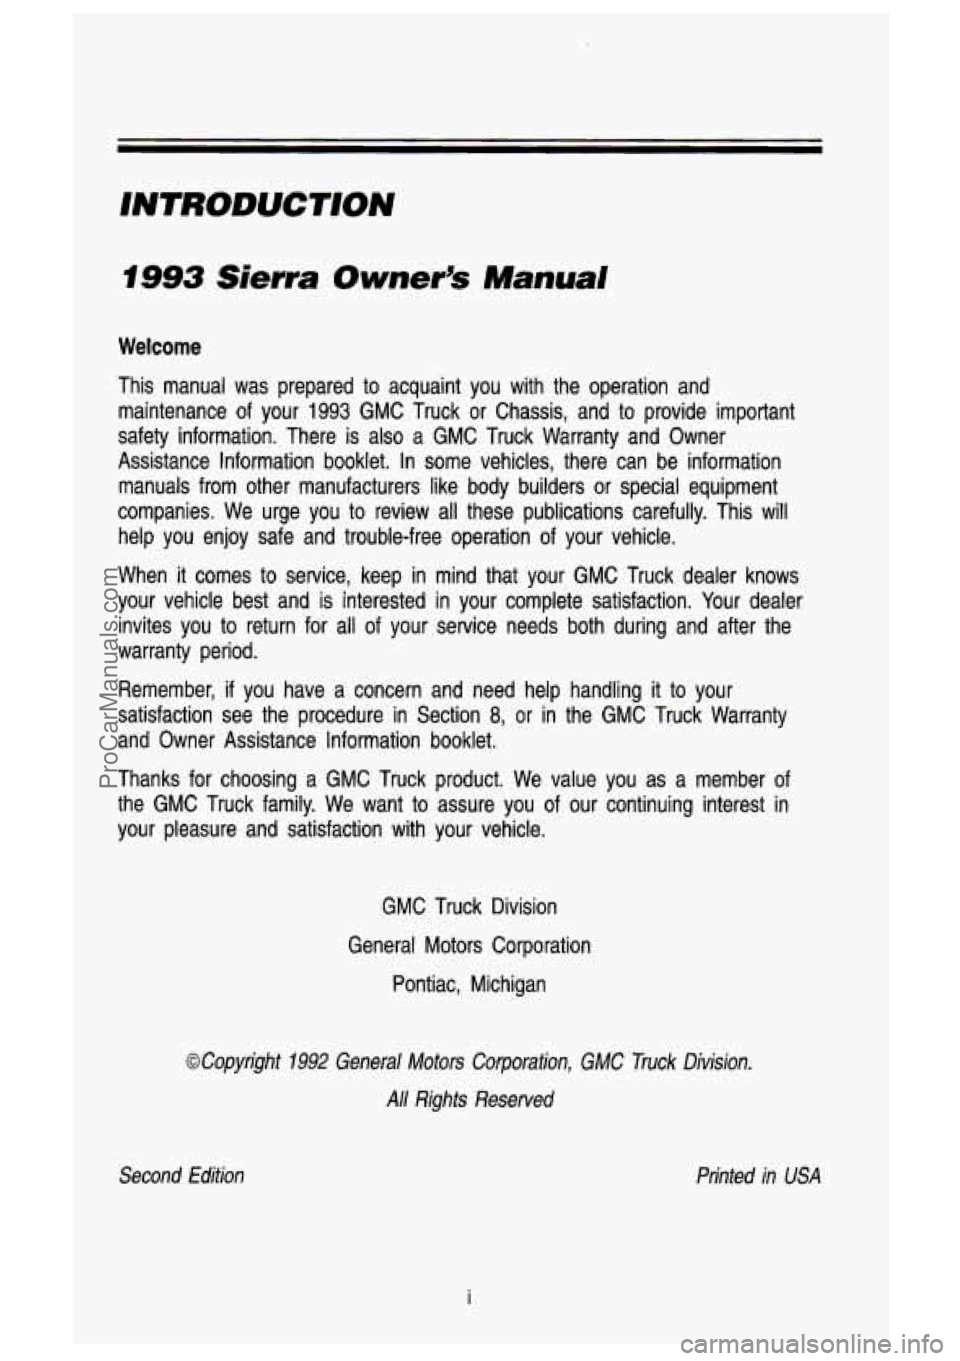 GMC SIERRA 1993  Owners Manual INTRODUCTION 
1993 Sierra Owner’s  Manual 
Welcome 
This  manual  was  prepared  to  acquaint  you  with  the  operation  an\
d 
maintenance  of  your 
1993 GMC  Truck or Chassis,  and  to  provide 